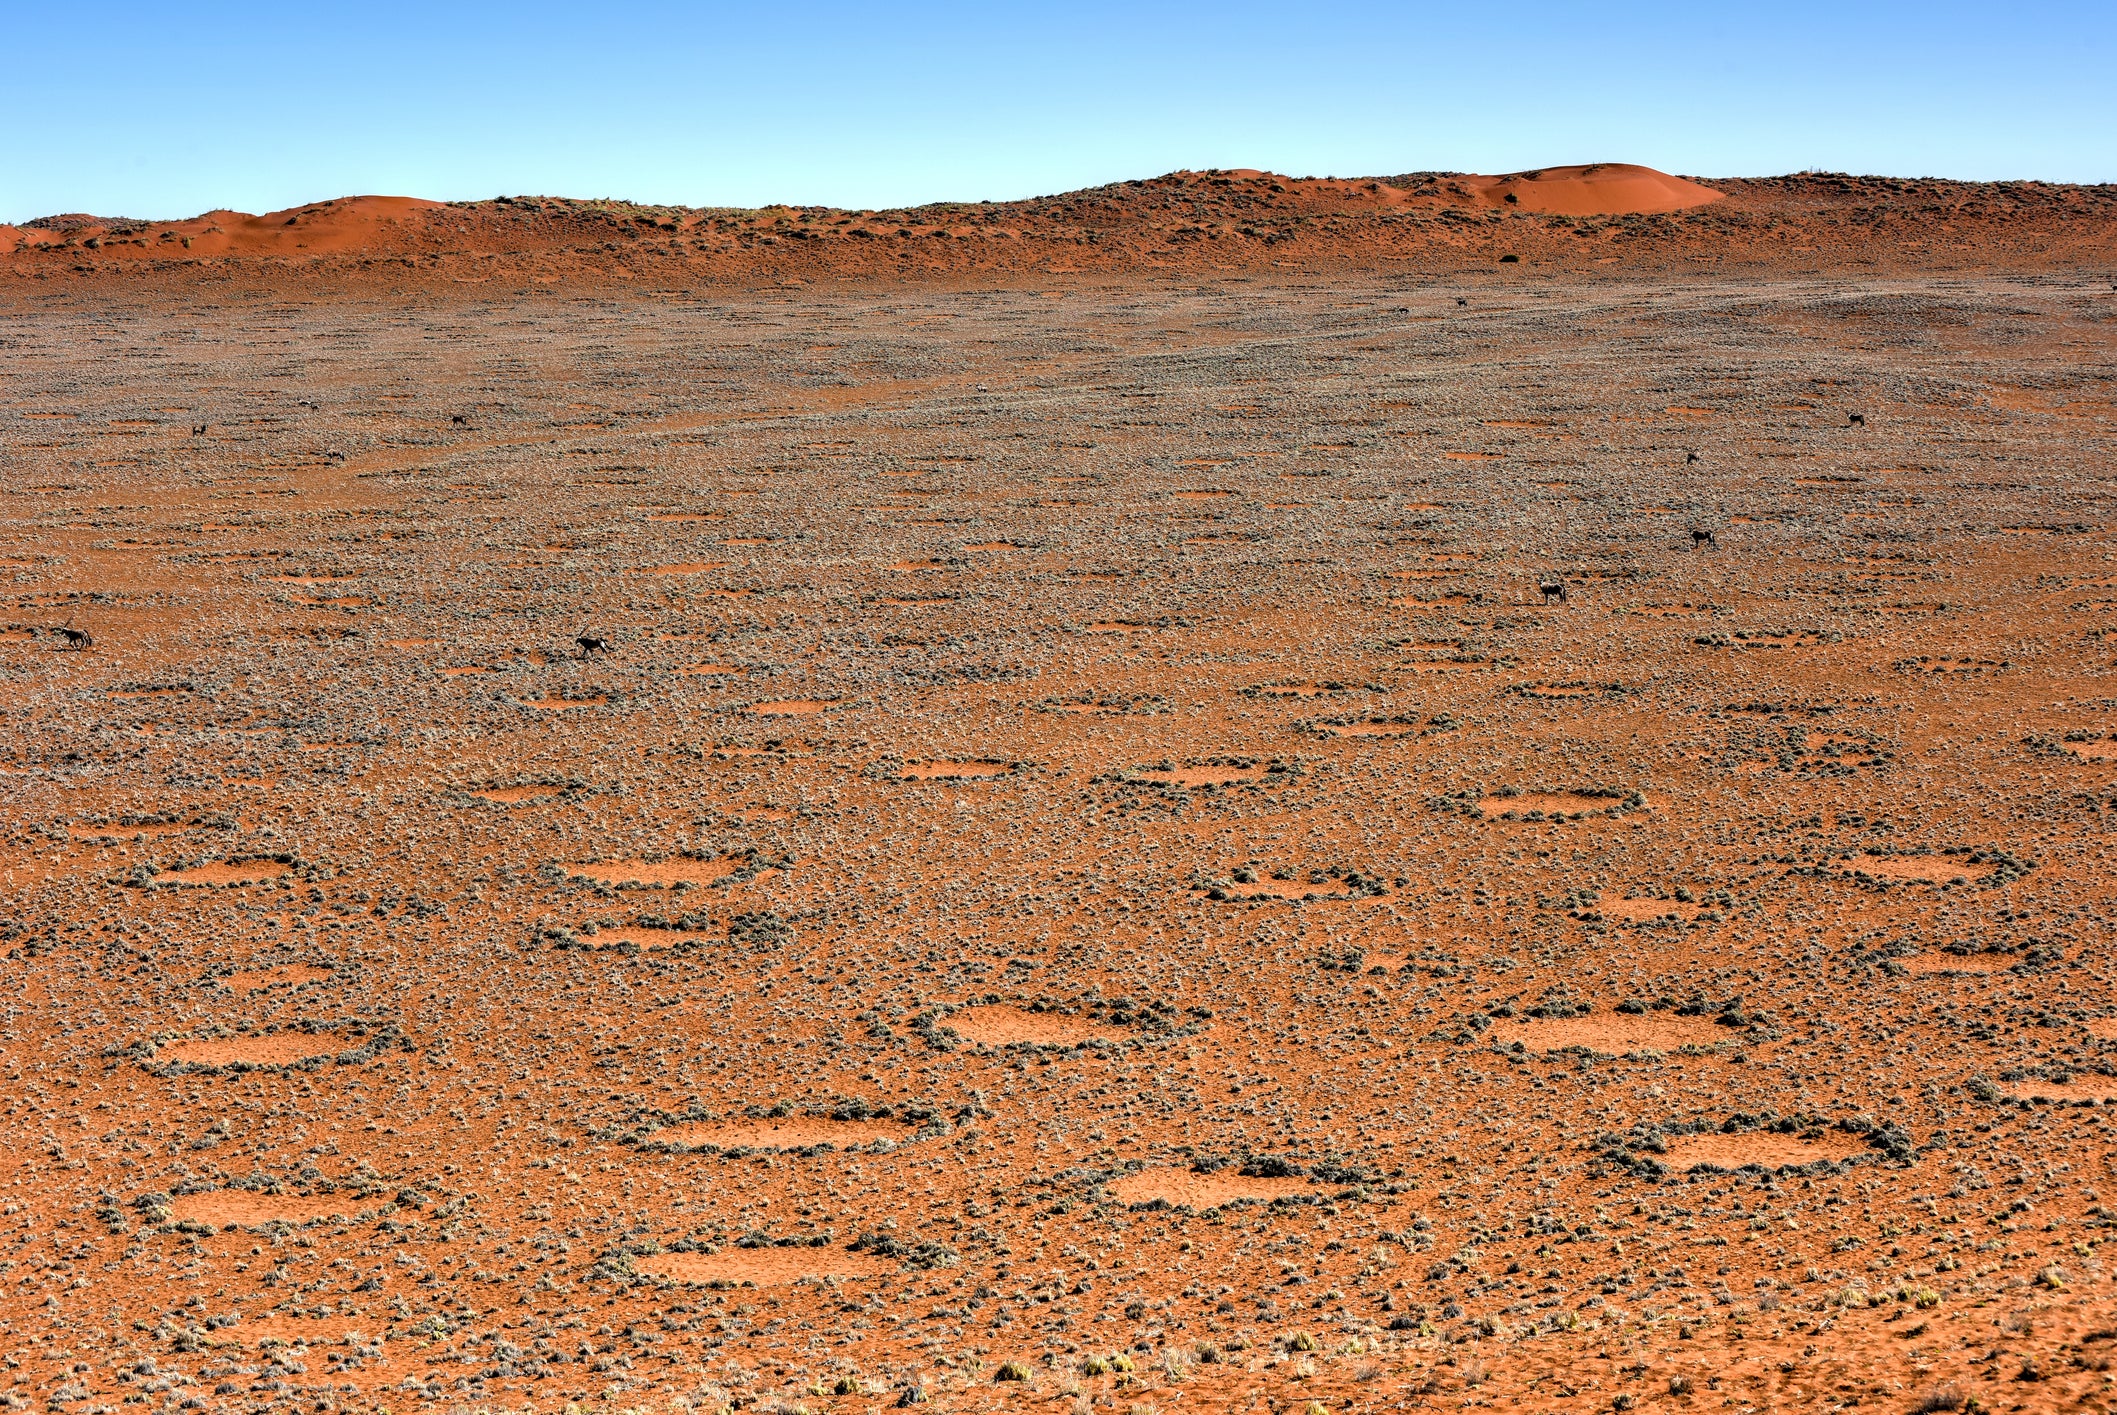 So-called fairy circles, located in the Namib Desert, in the Namib-Naukluft National Park of Namibia. Their presence is a sign that hydrogen is escaping from the Earth